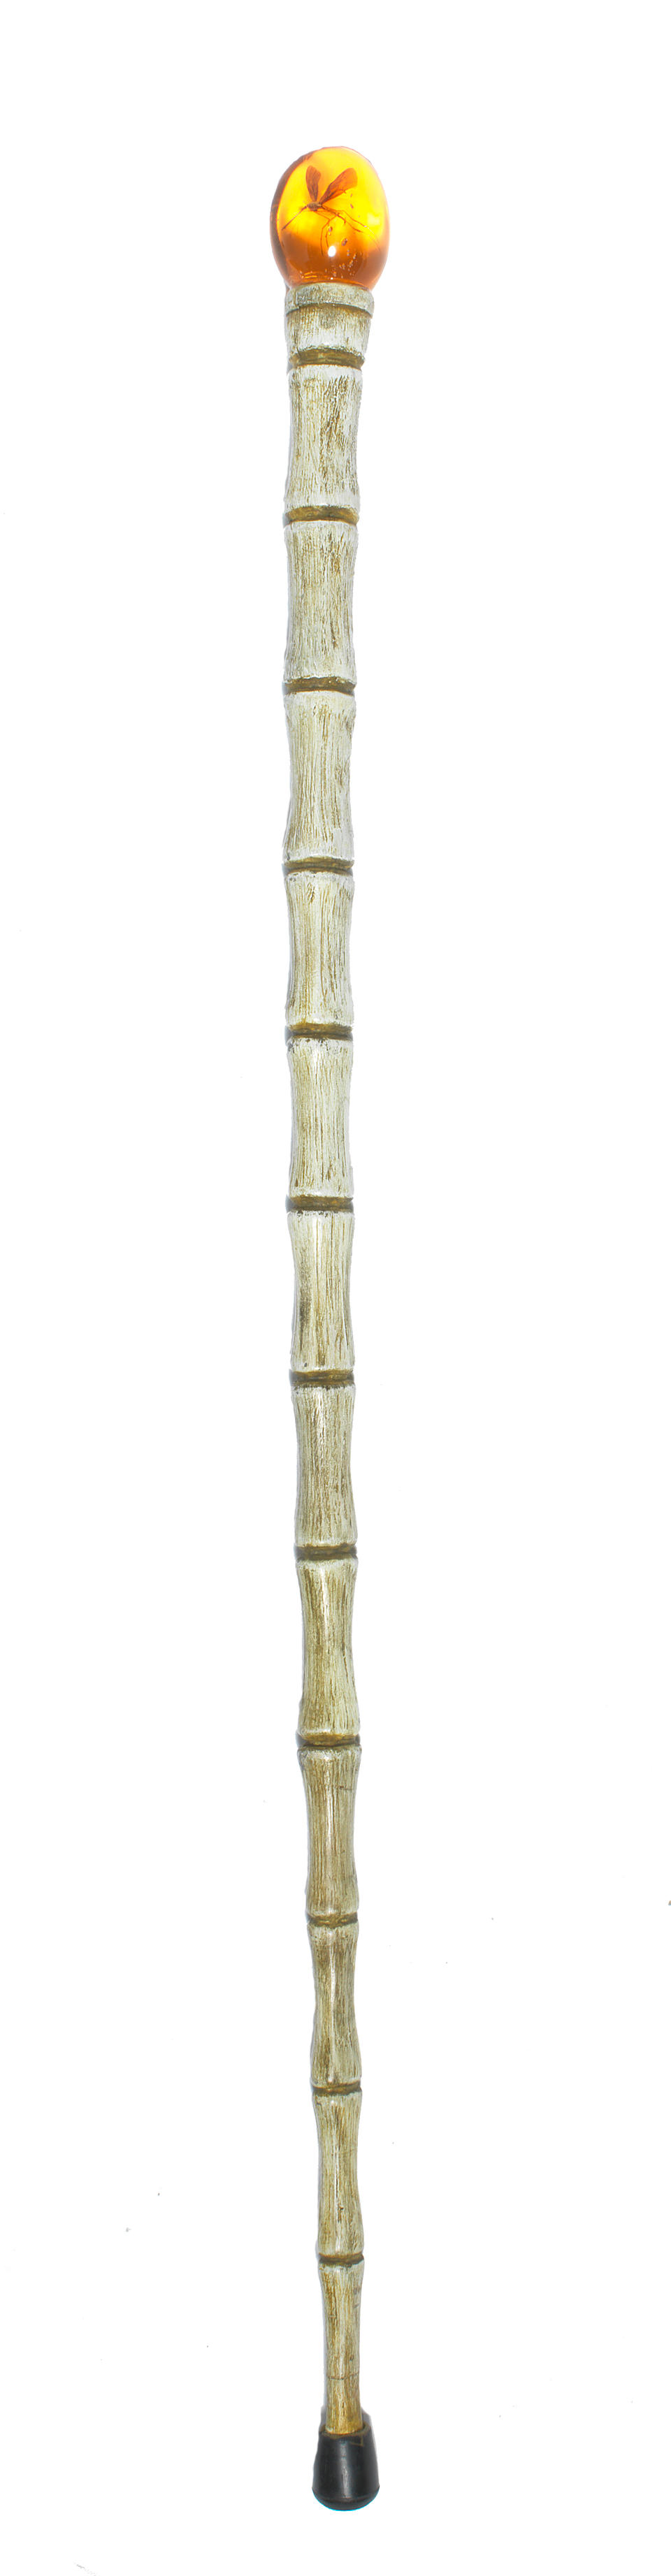 Jurassic Park: a replica prop cane based on the design used by Richard Attenborough as John Hammond for the 1993 Universal production,